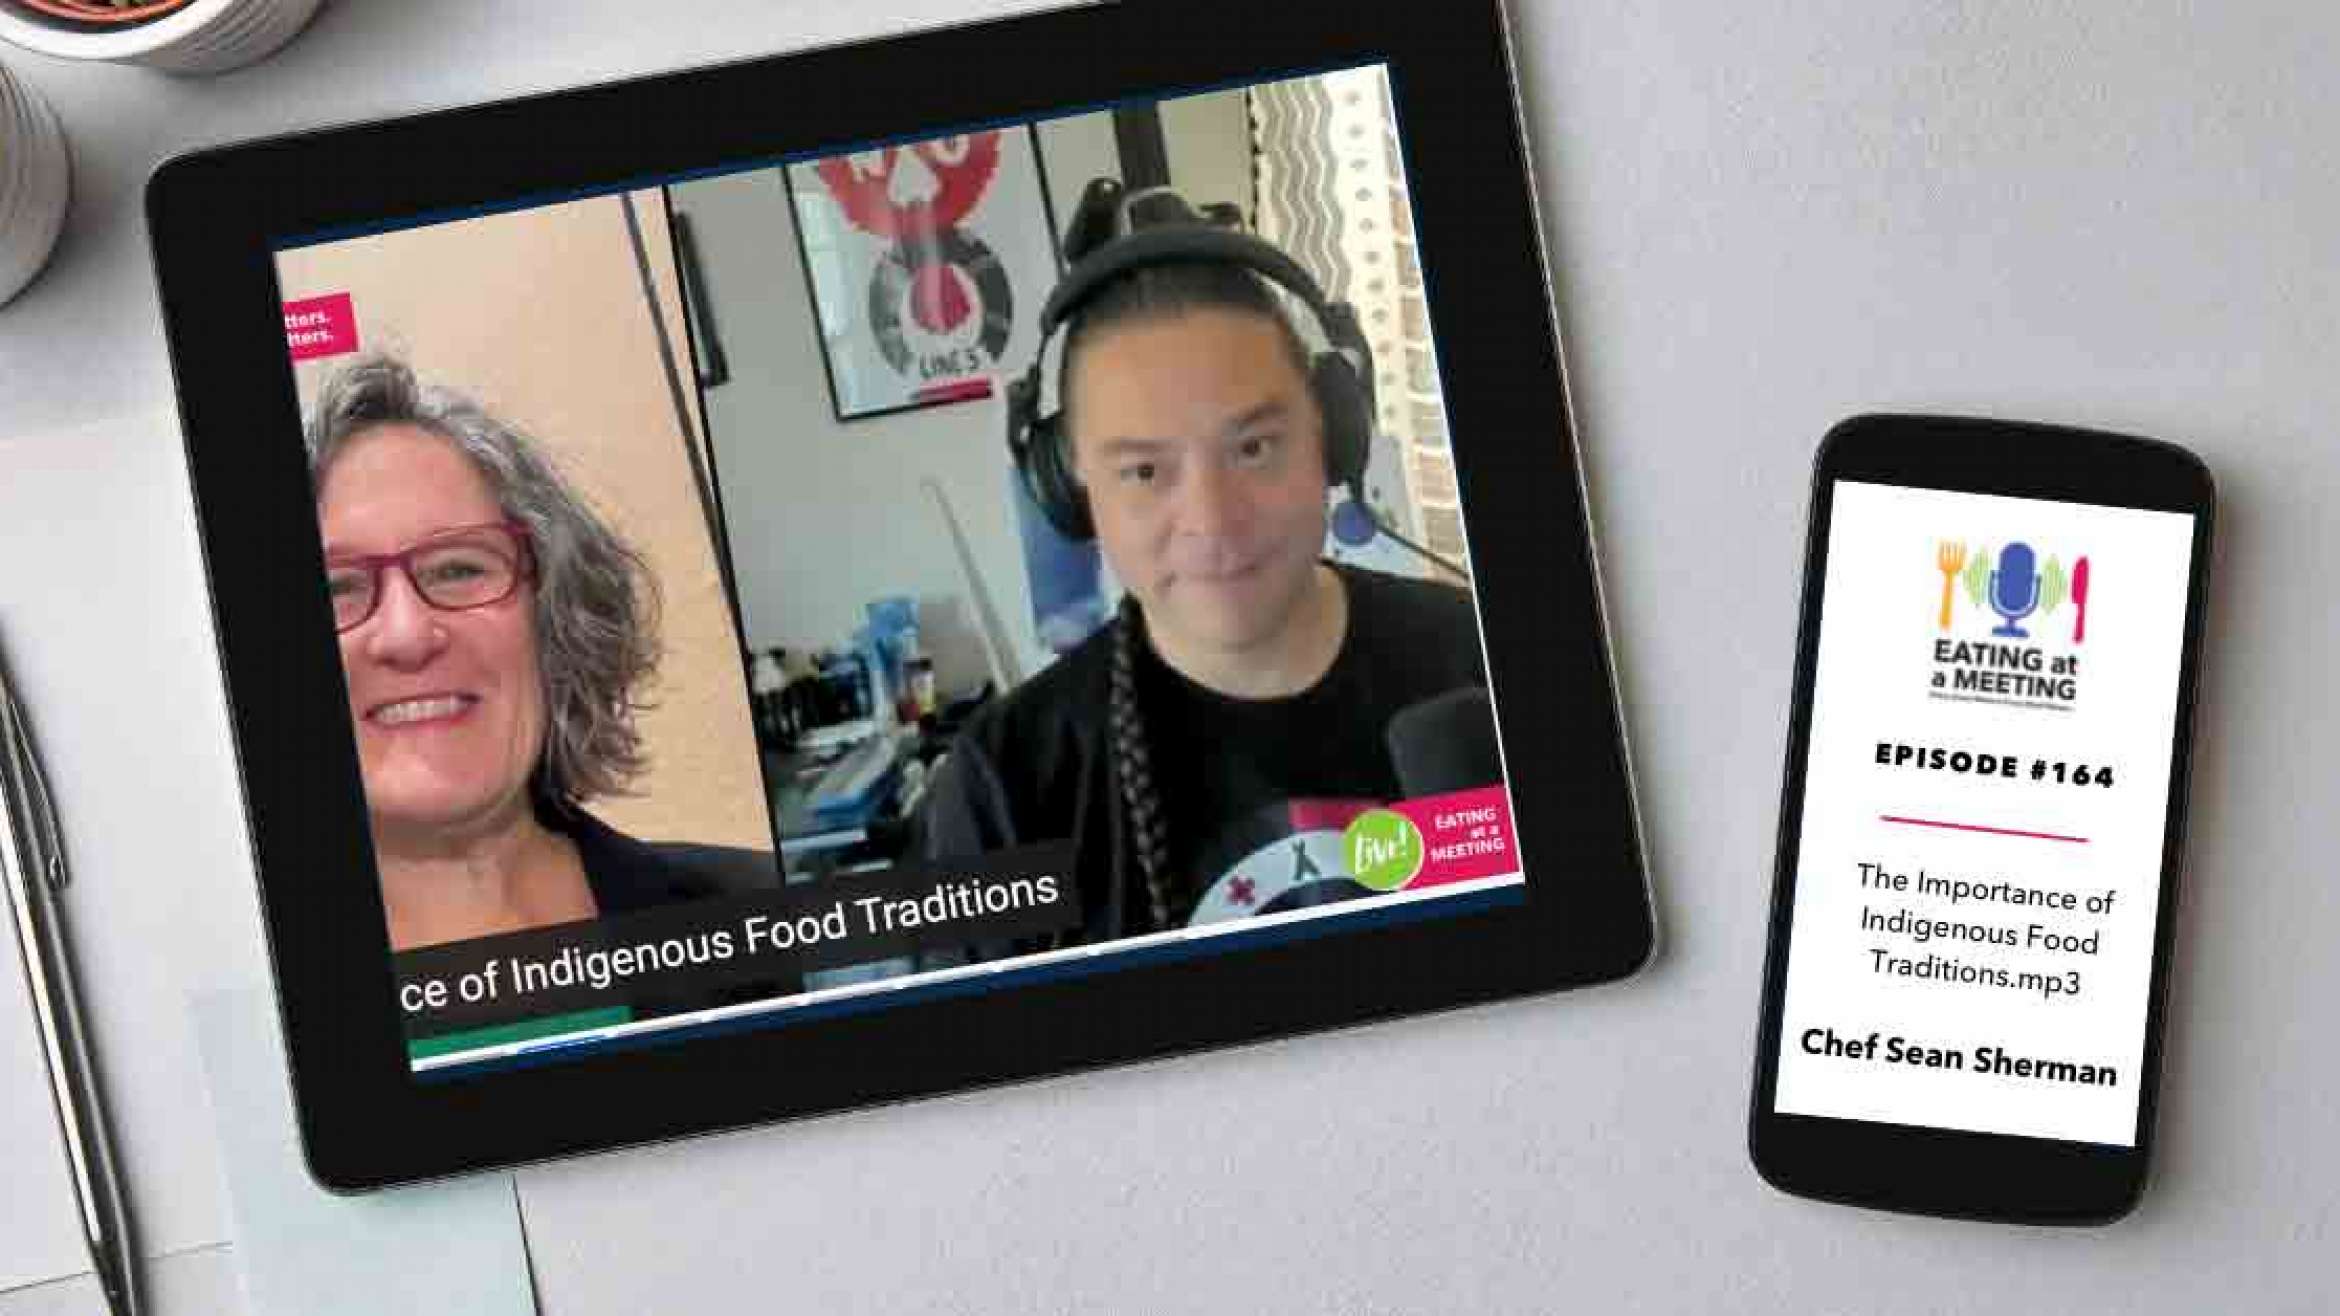 An iPad and iPhone on a table. On the iPad is a picture of two men who are on video screen. On the iPhone is the Eating at a Meeting podcast logo with Episode #163 The Importance of Indigenous Food Traditions with Chef Sean Sherman, The Sioux Chef